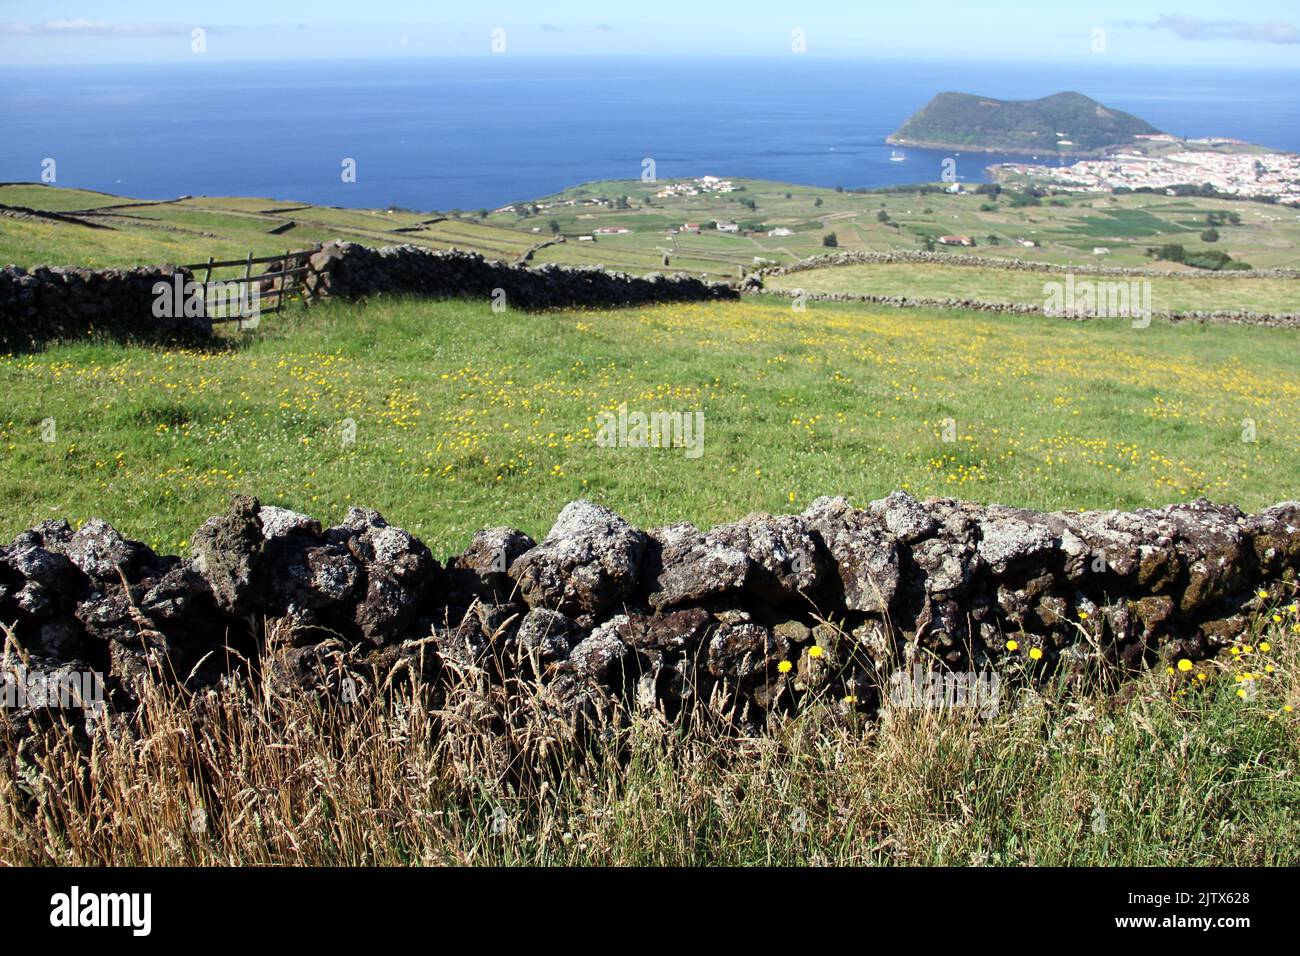 Rural landscape, with green pastures and stone fences, sloping toward the ocean coast, Terceira Island, Azores, Portugal Stock Photo